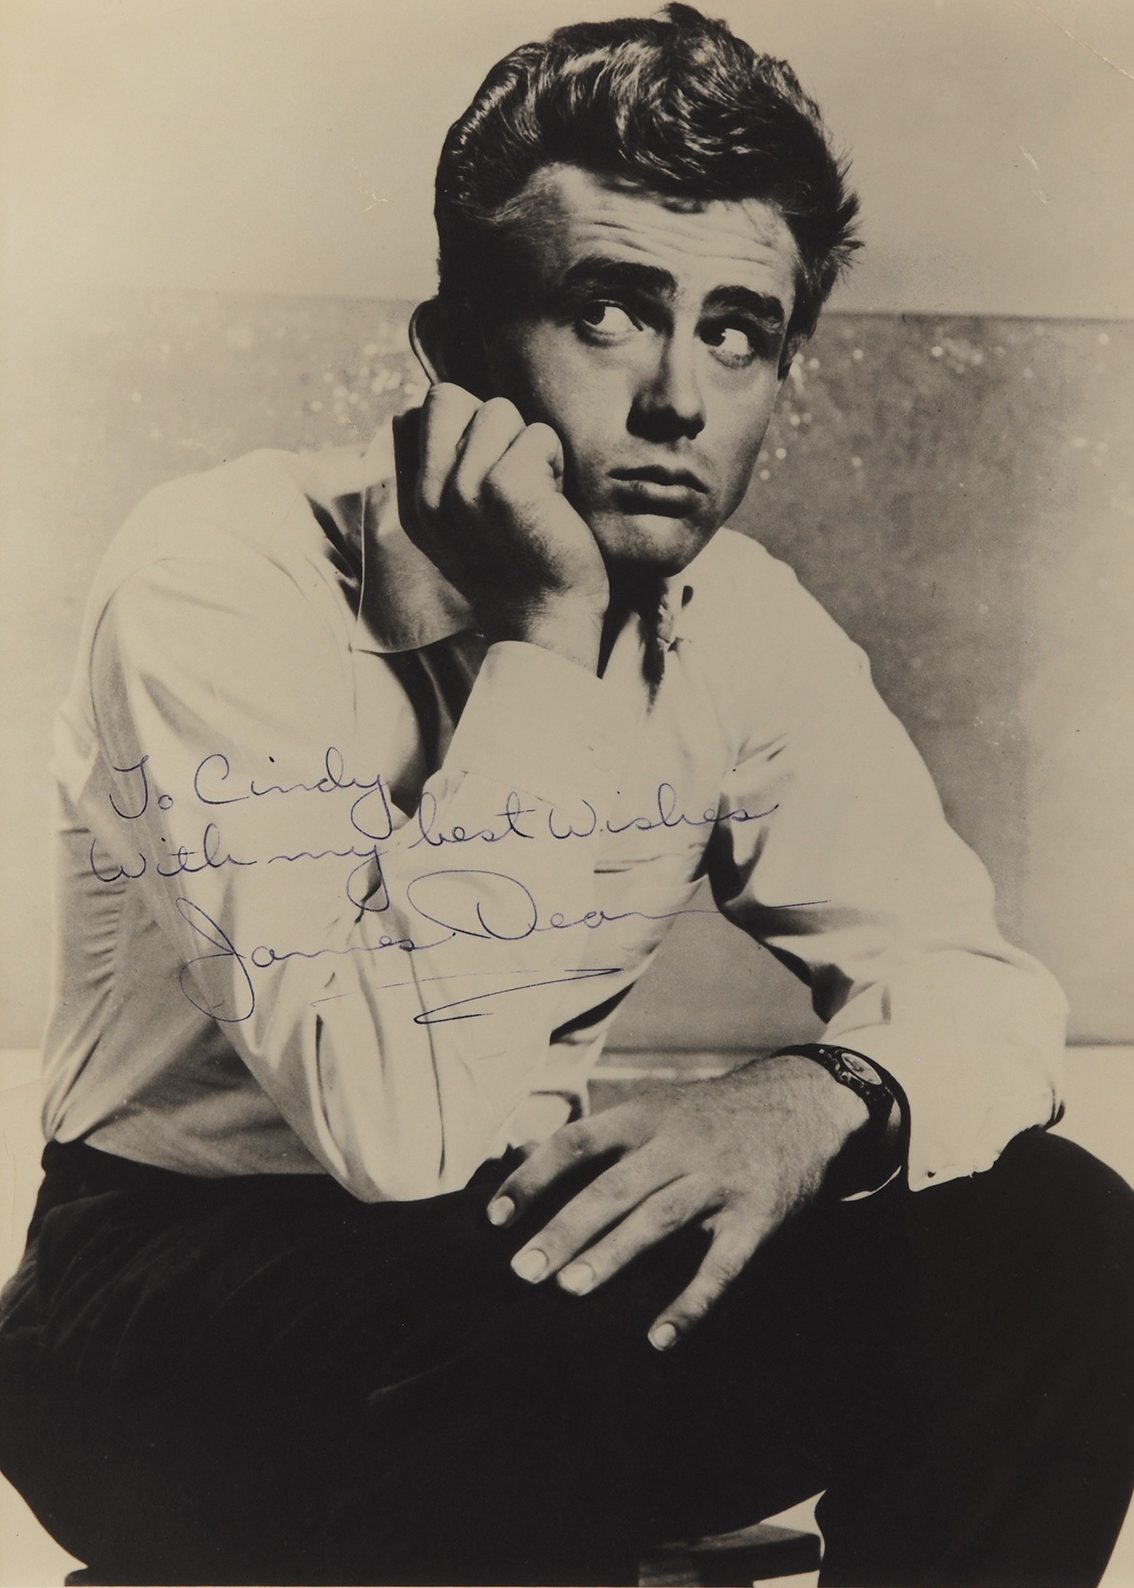 Hollywood Signed Photos Auction